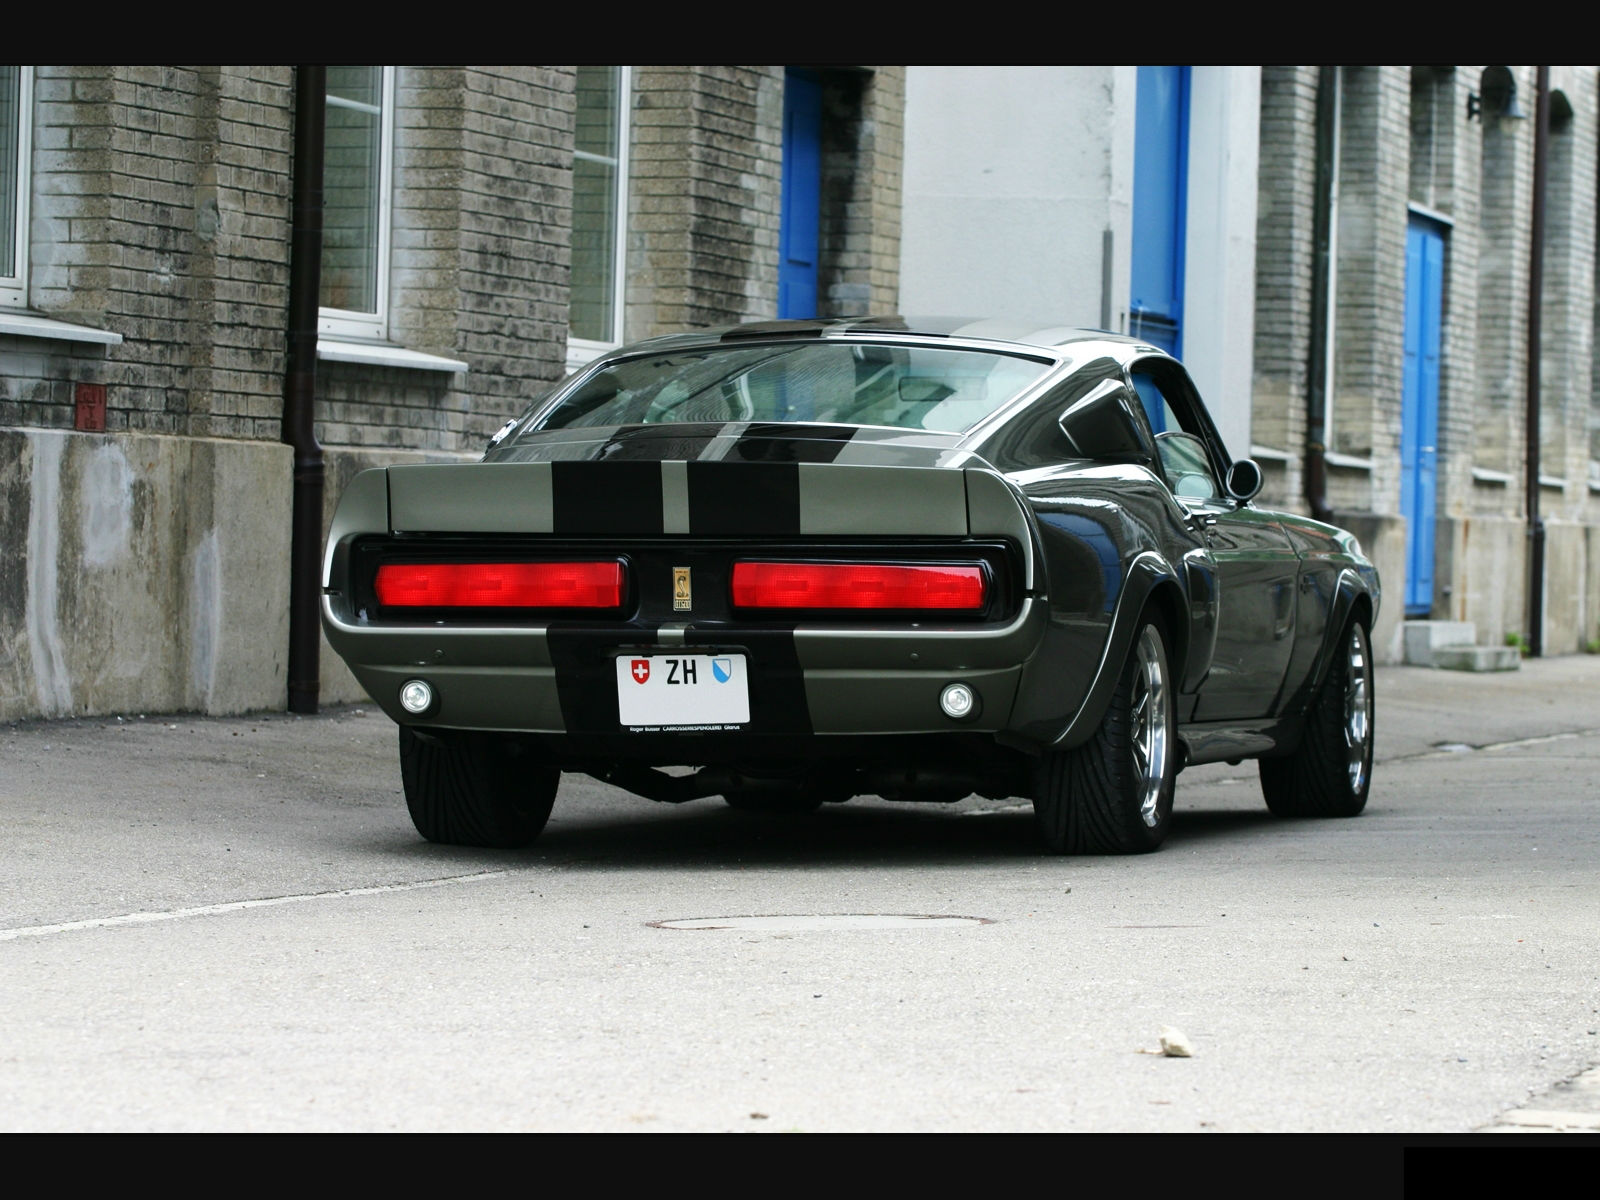 vehicles, Classic, Cars, Ford, Mustang, Shelby, Gt500, Muscle, Cars Wallpaper